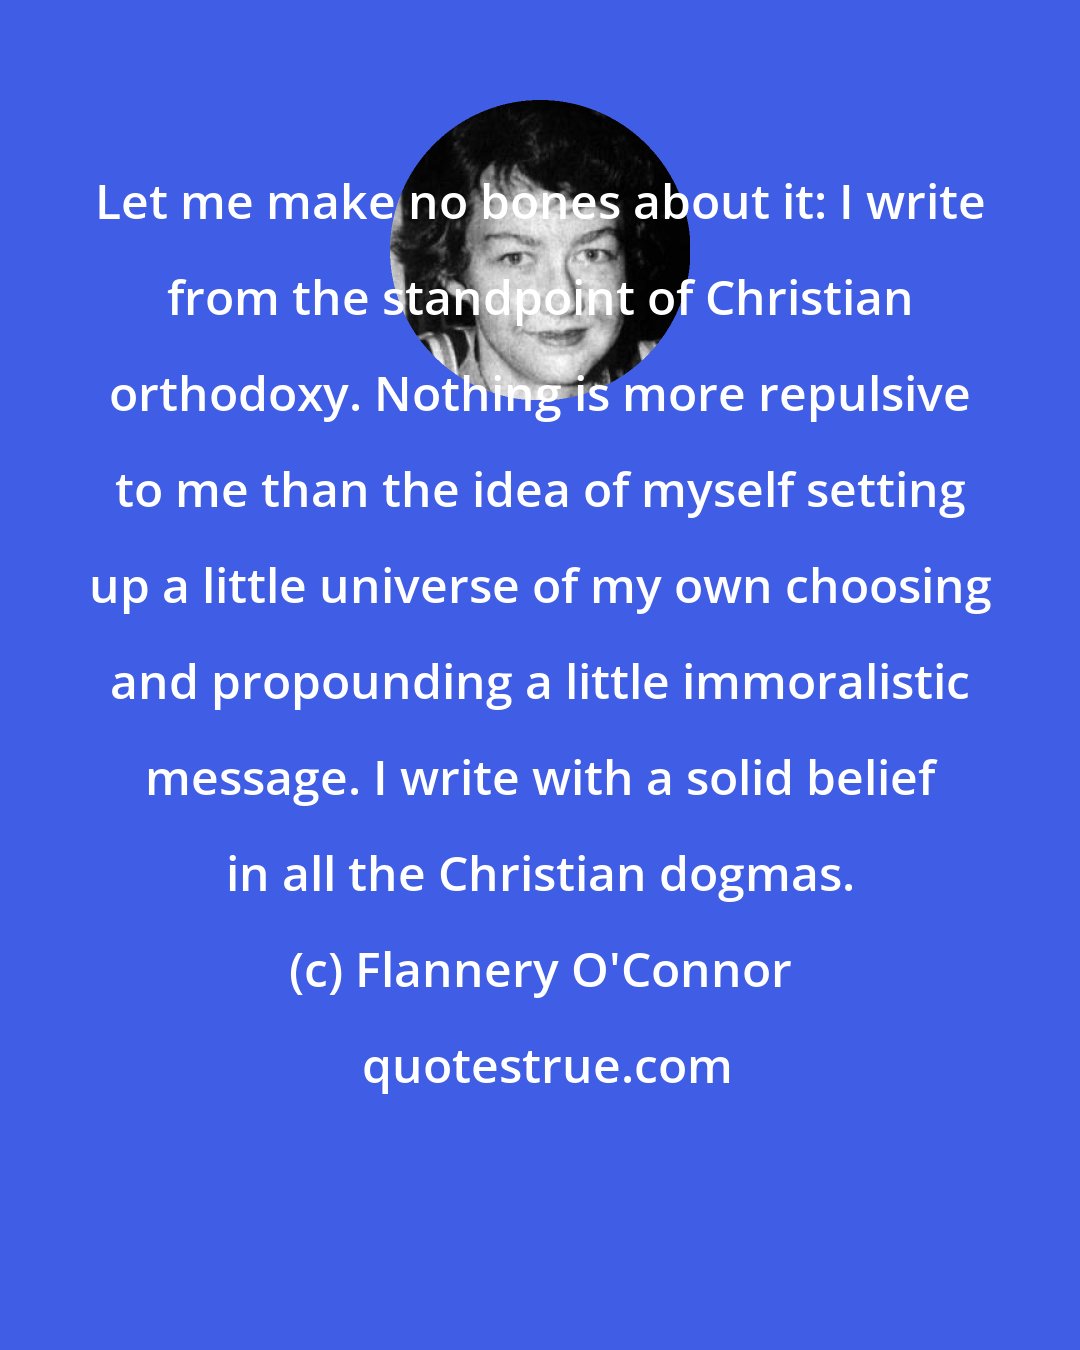 Flannery O'Connor: Let me make no bones about it: I write from the standpoint of Christian orthodoxy. Nothing is more repulsive to me than the idea of myself setting up a little universe of my own choosing and propounding a little immoralistic message. I write with a solid belief in all the Christian dogmas.